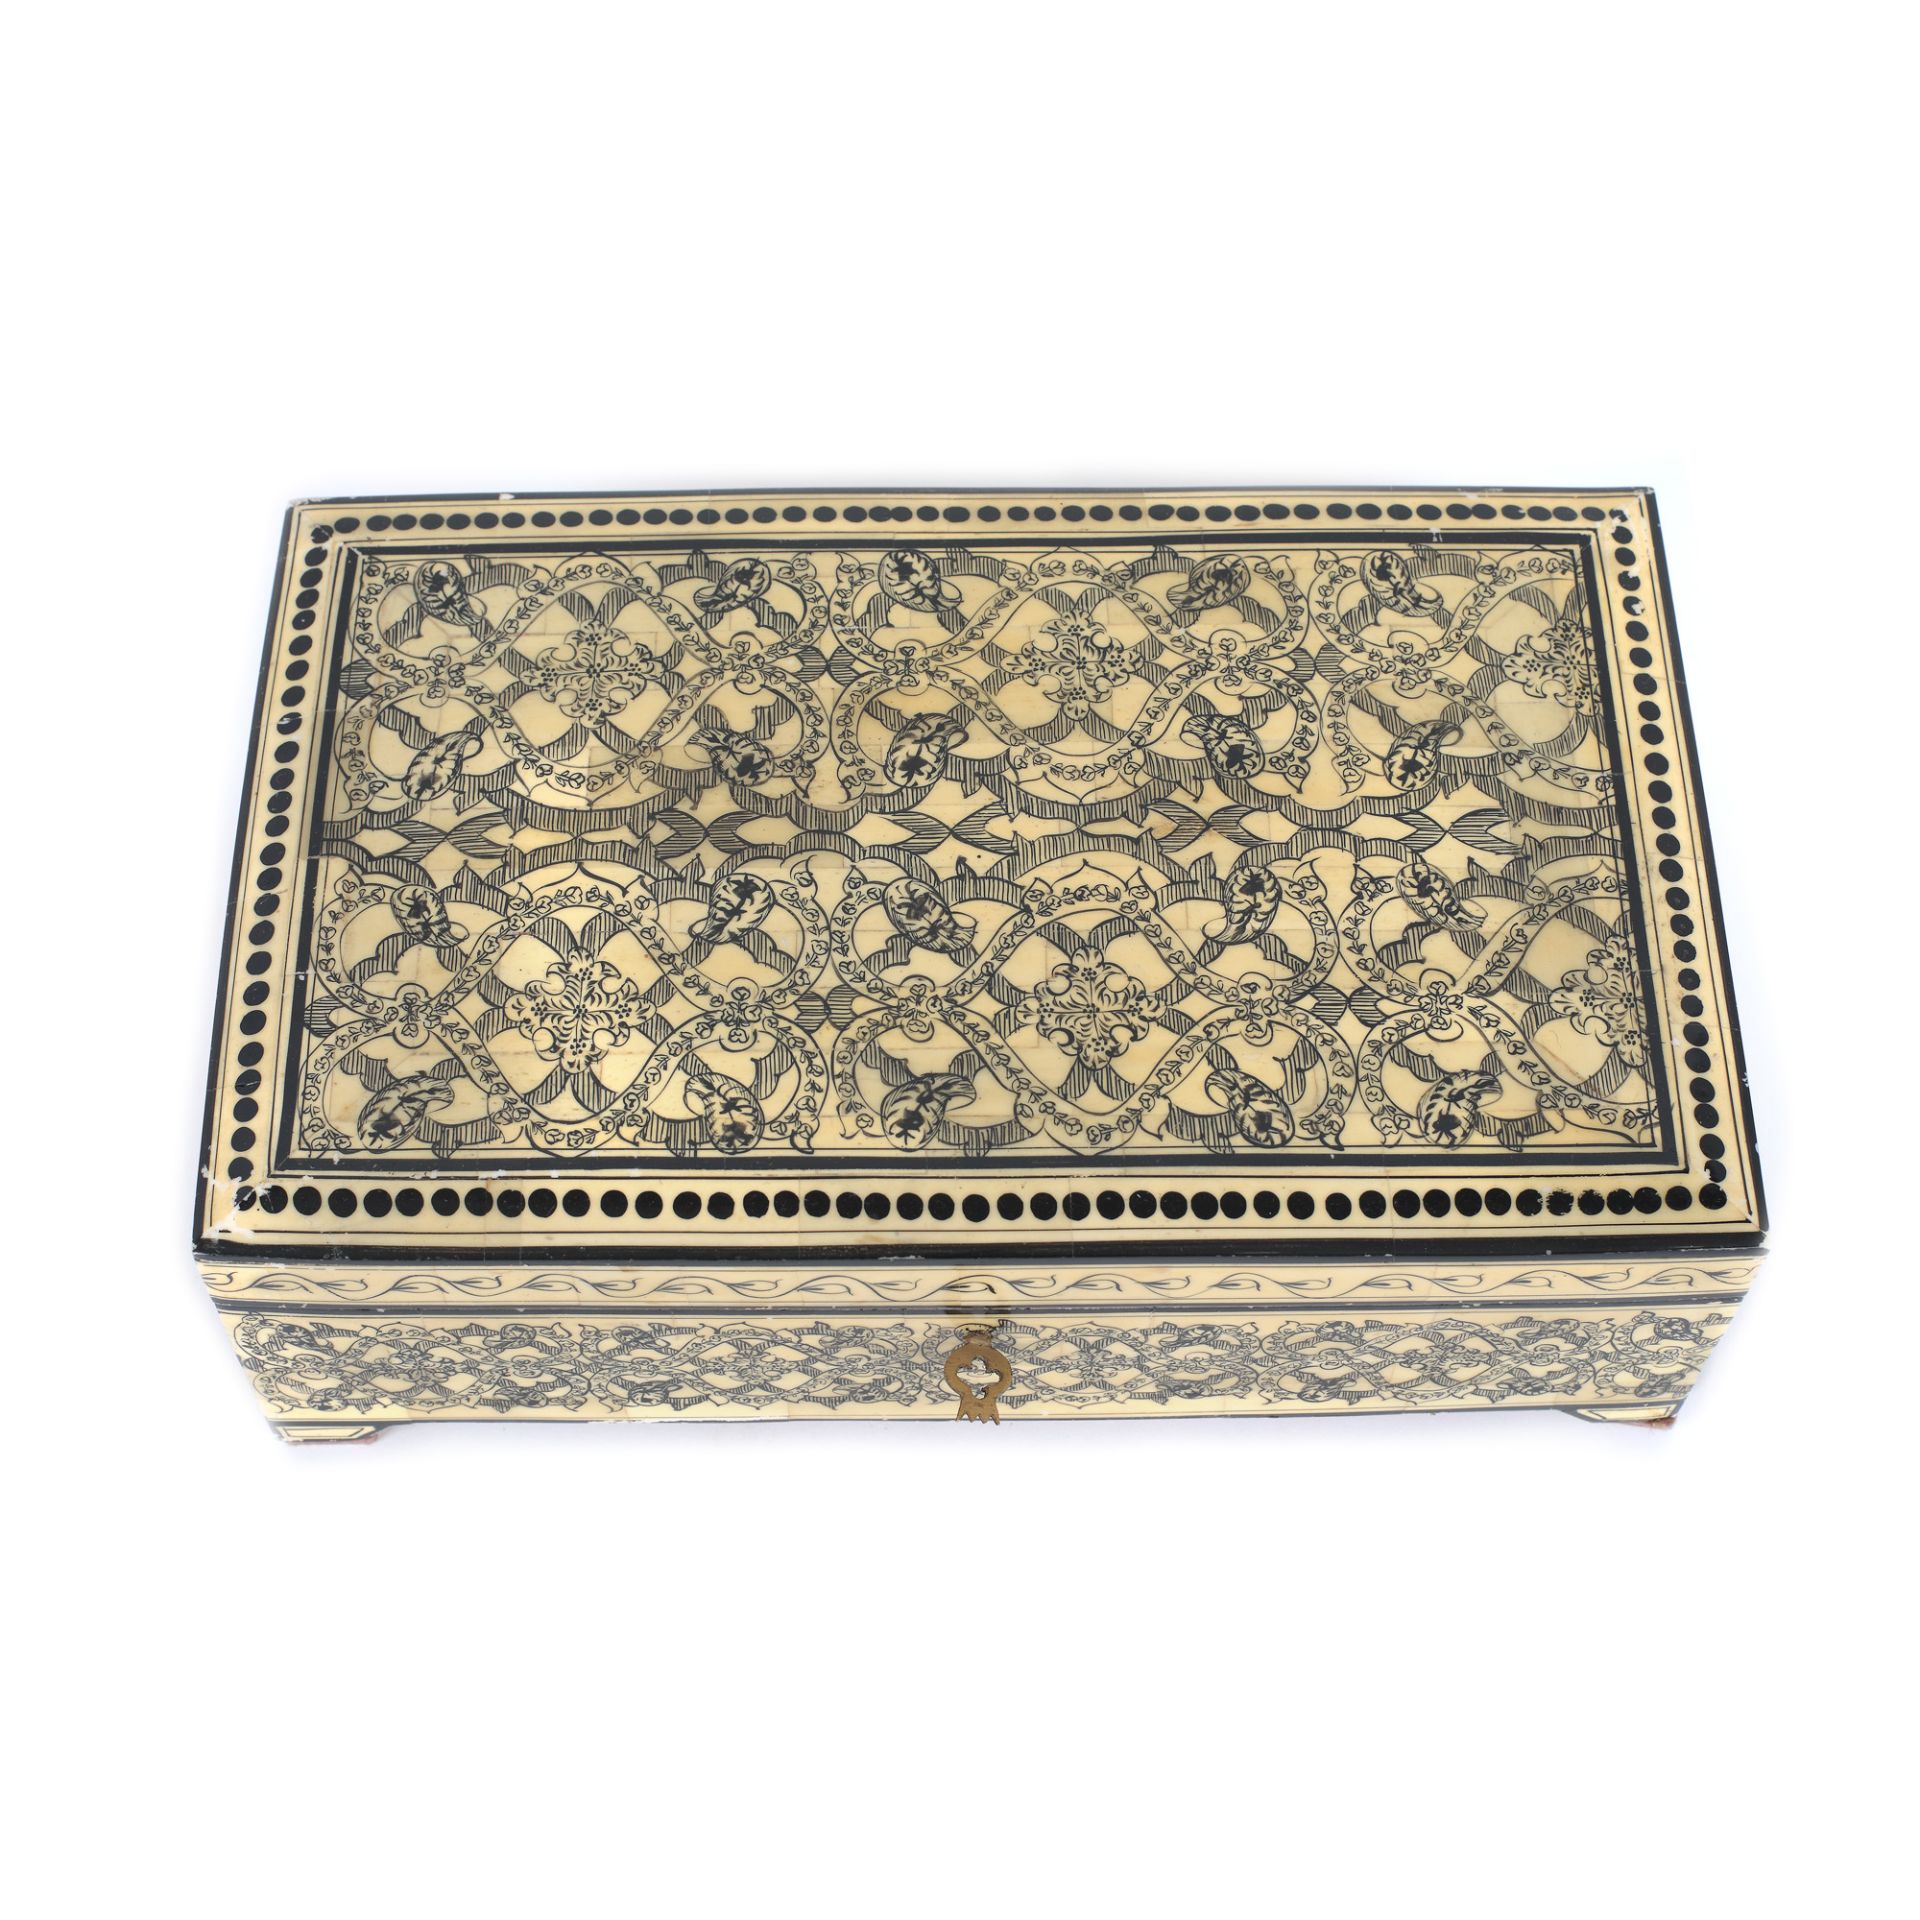 Wooden box with bone inlaying, decorated with floral motifs, possibly India - Image 4 of 4